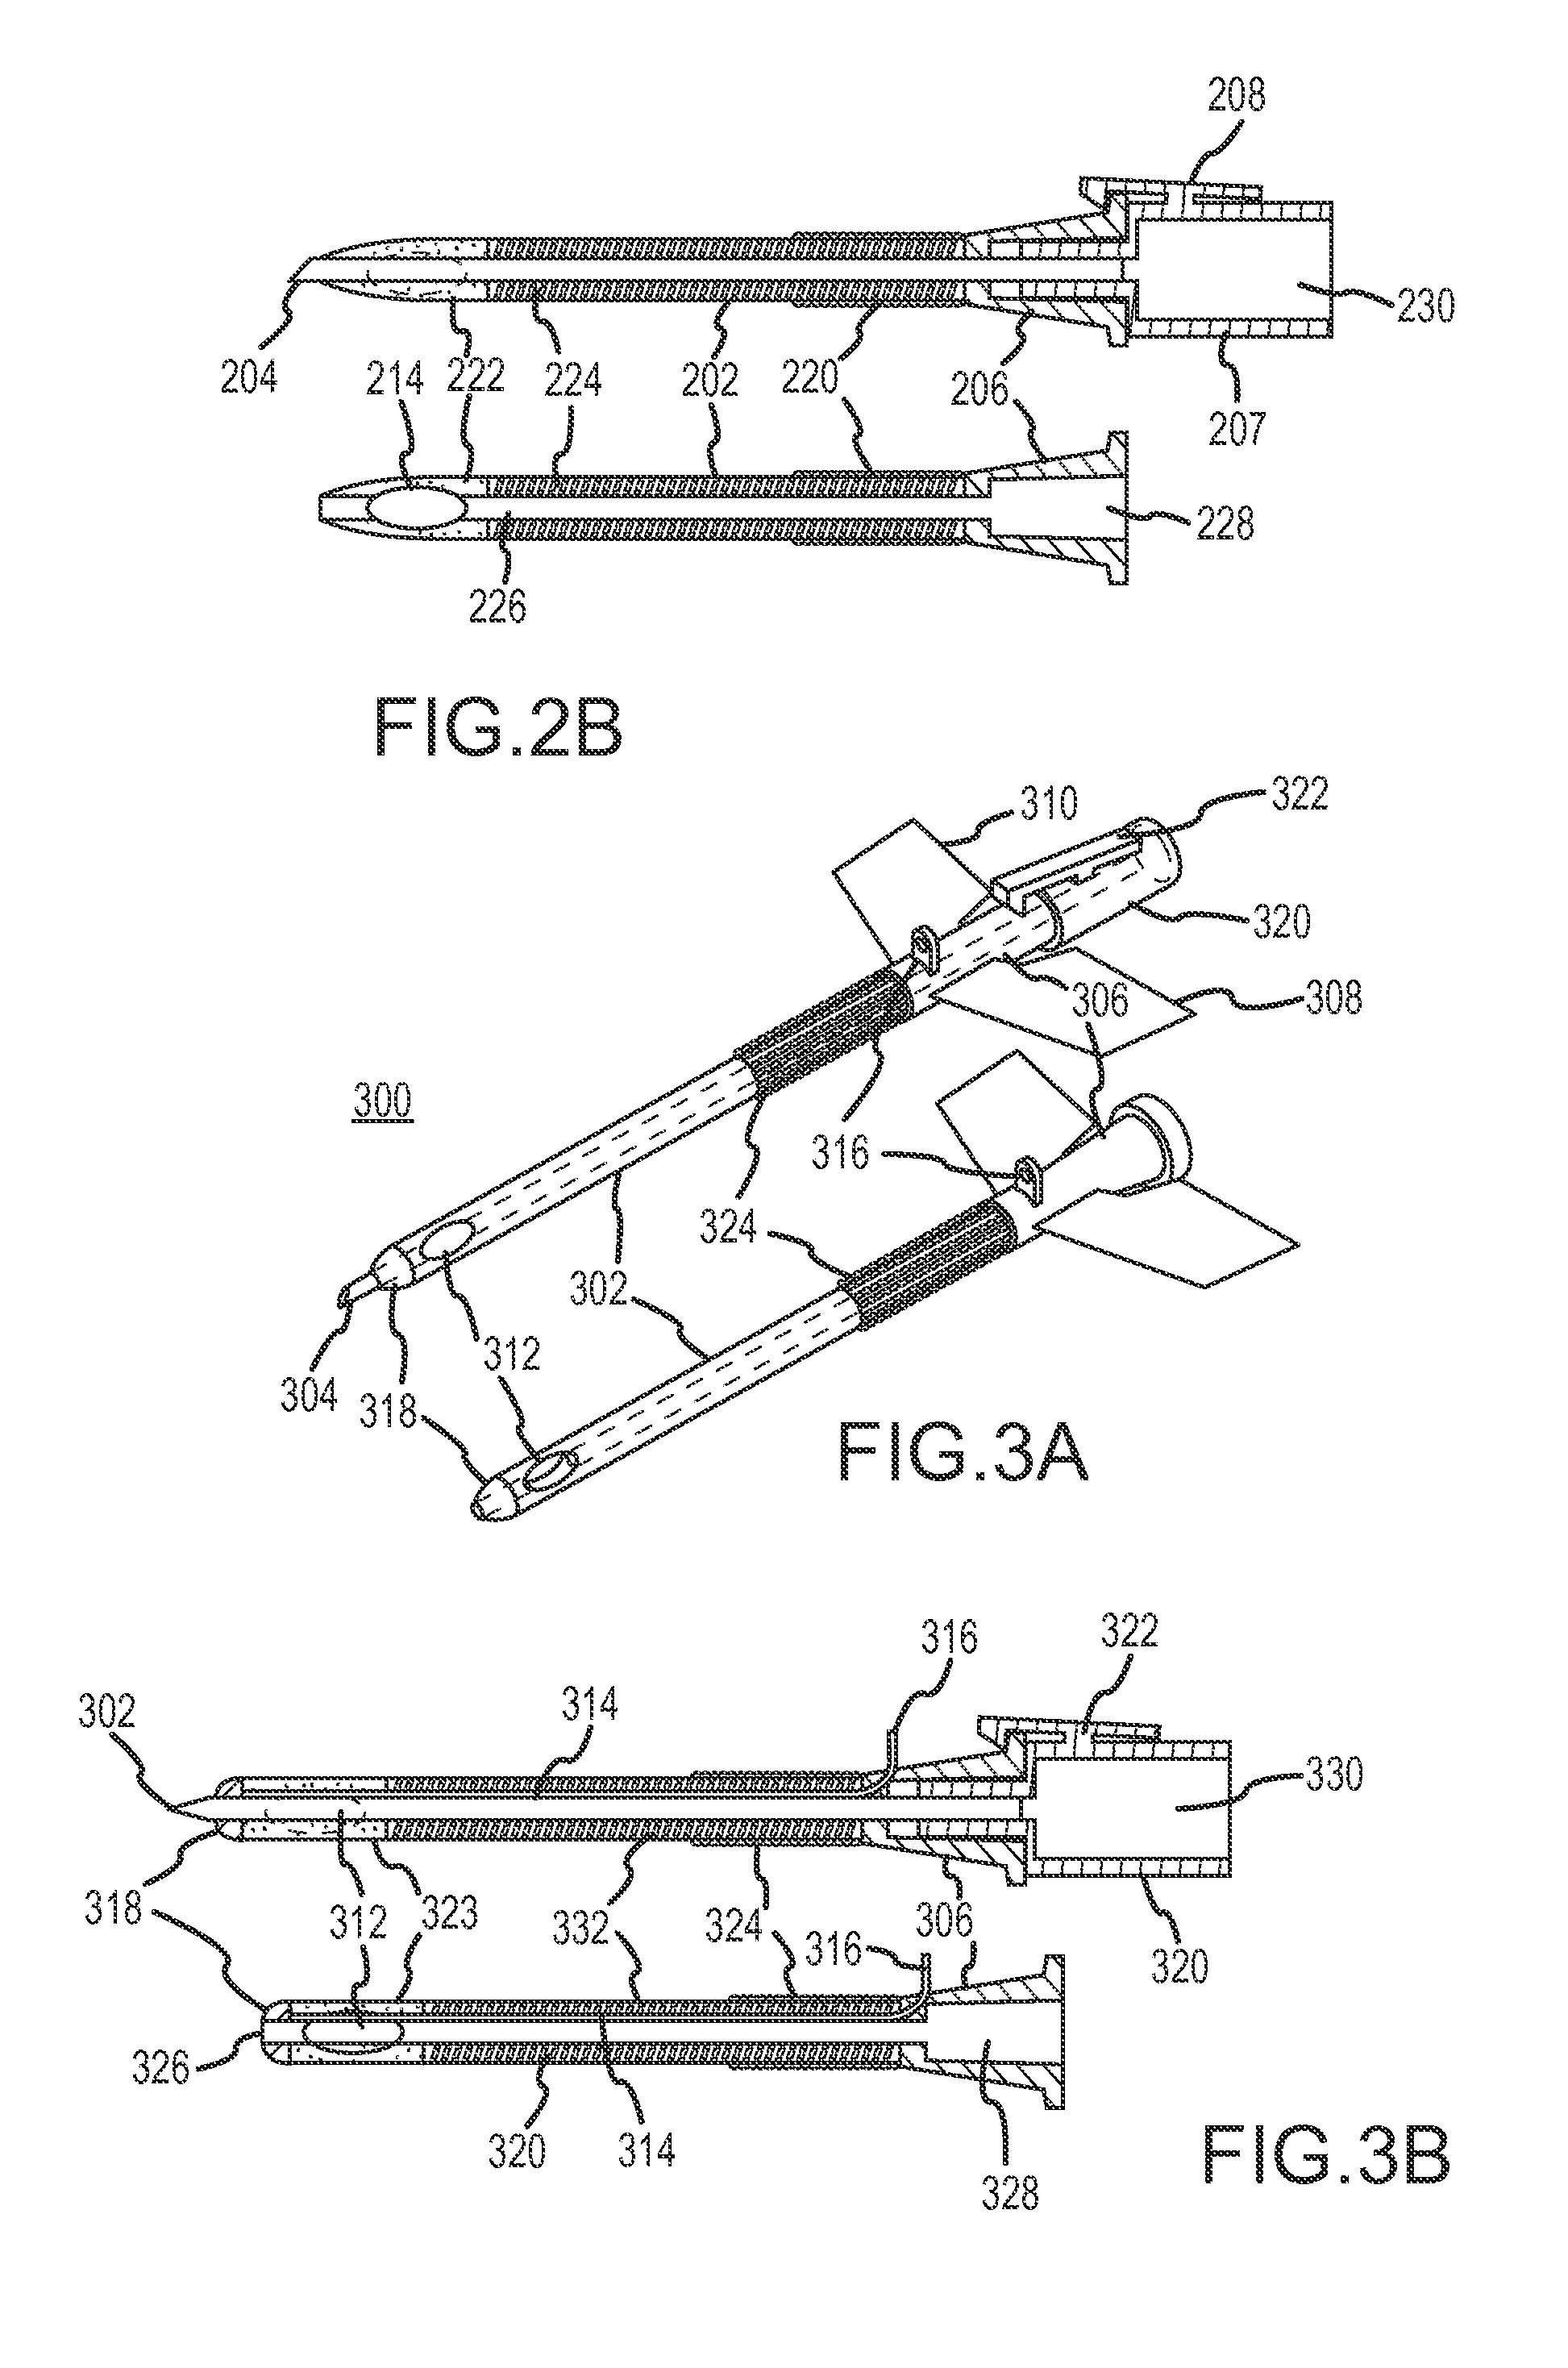 Continuous anesthesia nerve conduction apparatus, system and method thereof